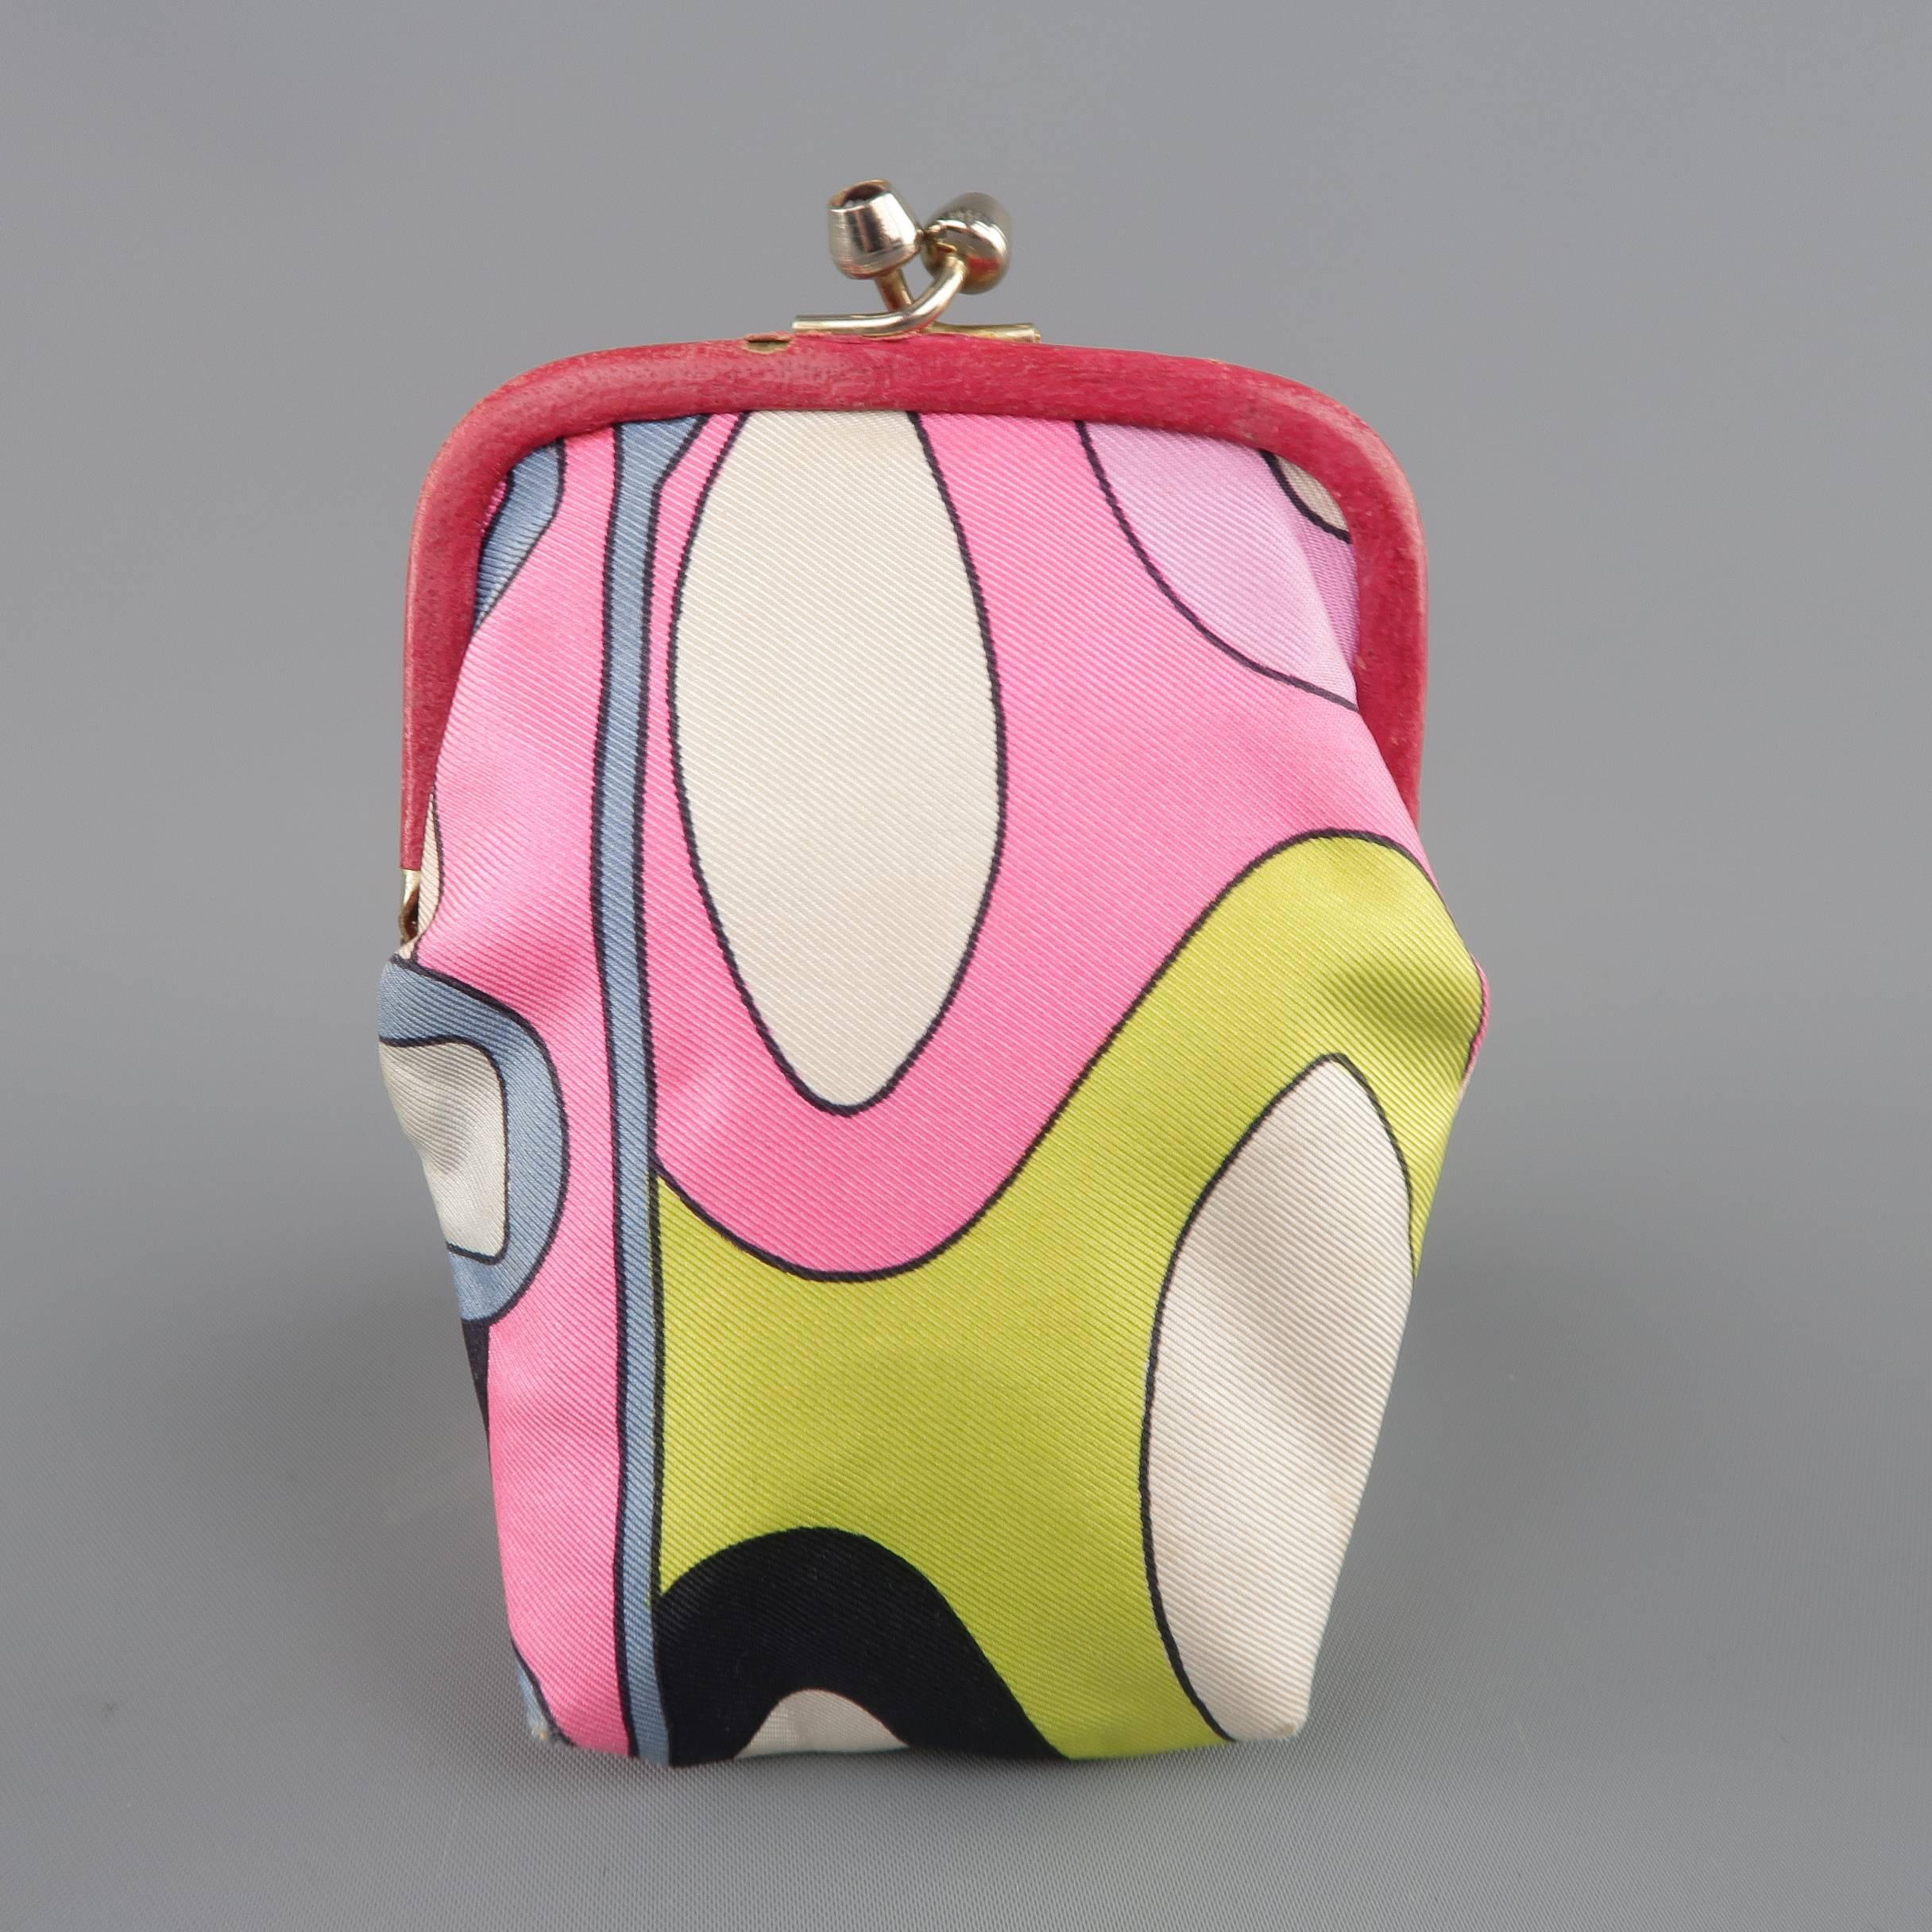 Vintage EMILIO PUCCI coin purse comes in signature geometric abstract print silk twill and features a leather trimmed, pink rhinestone kiss lock closure and pink lining. Wear throughout. As-Is. Made in Italy.
 
Fair Pre-Owned Condition.
